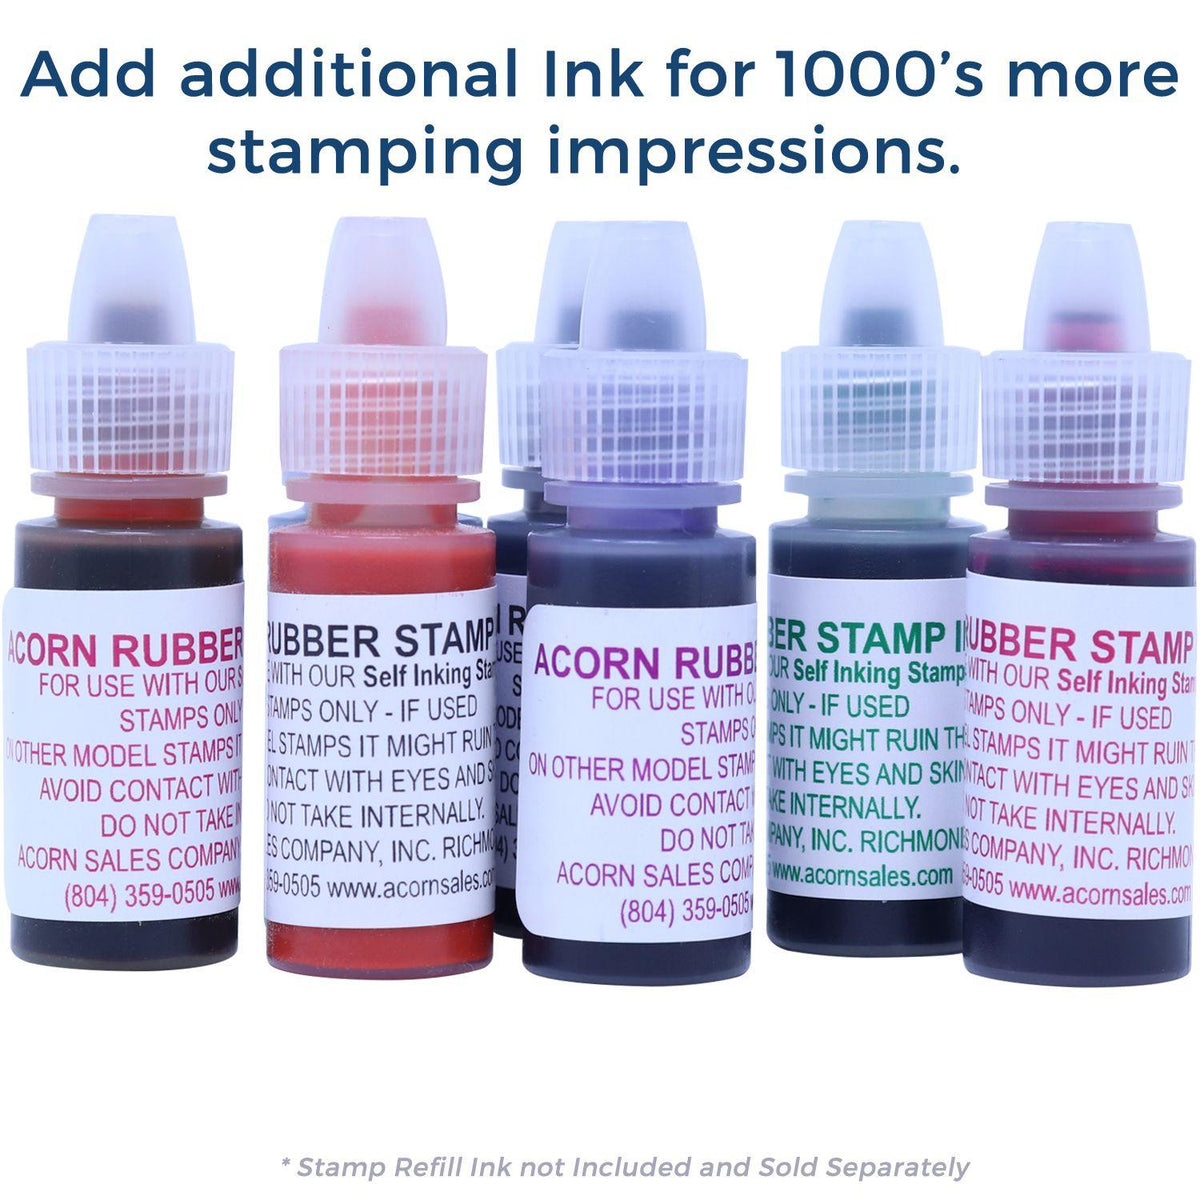 Refill Inks for Large Pre-Inked Paid with Date Line Stamp Available